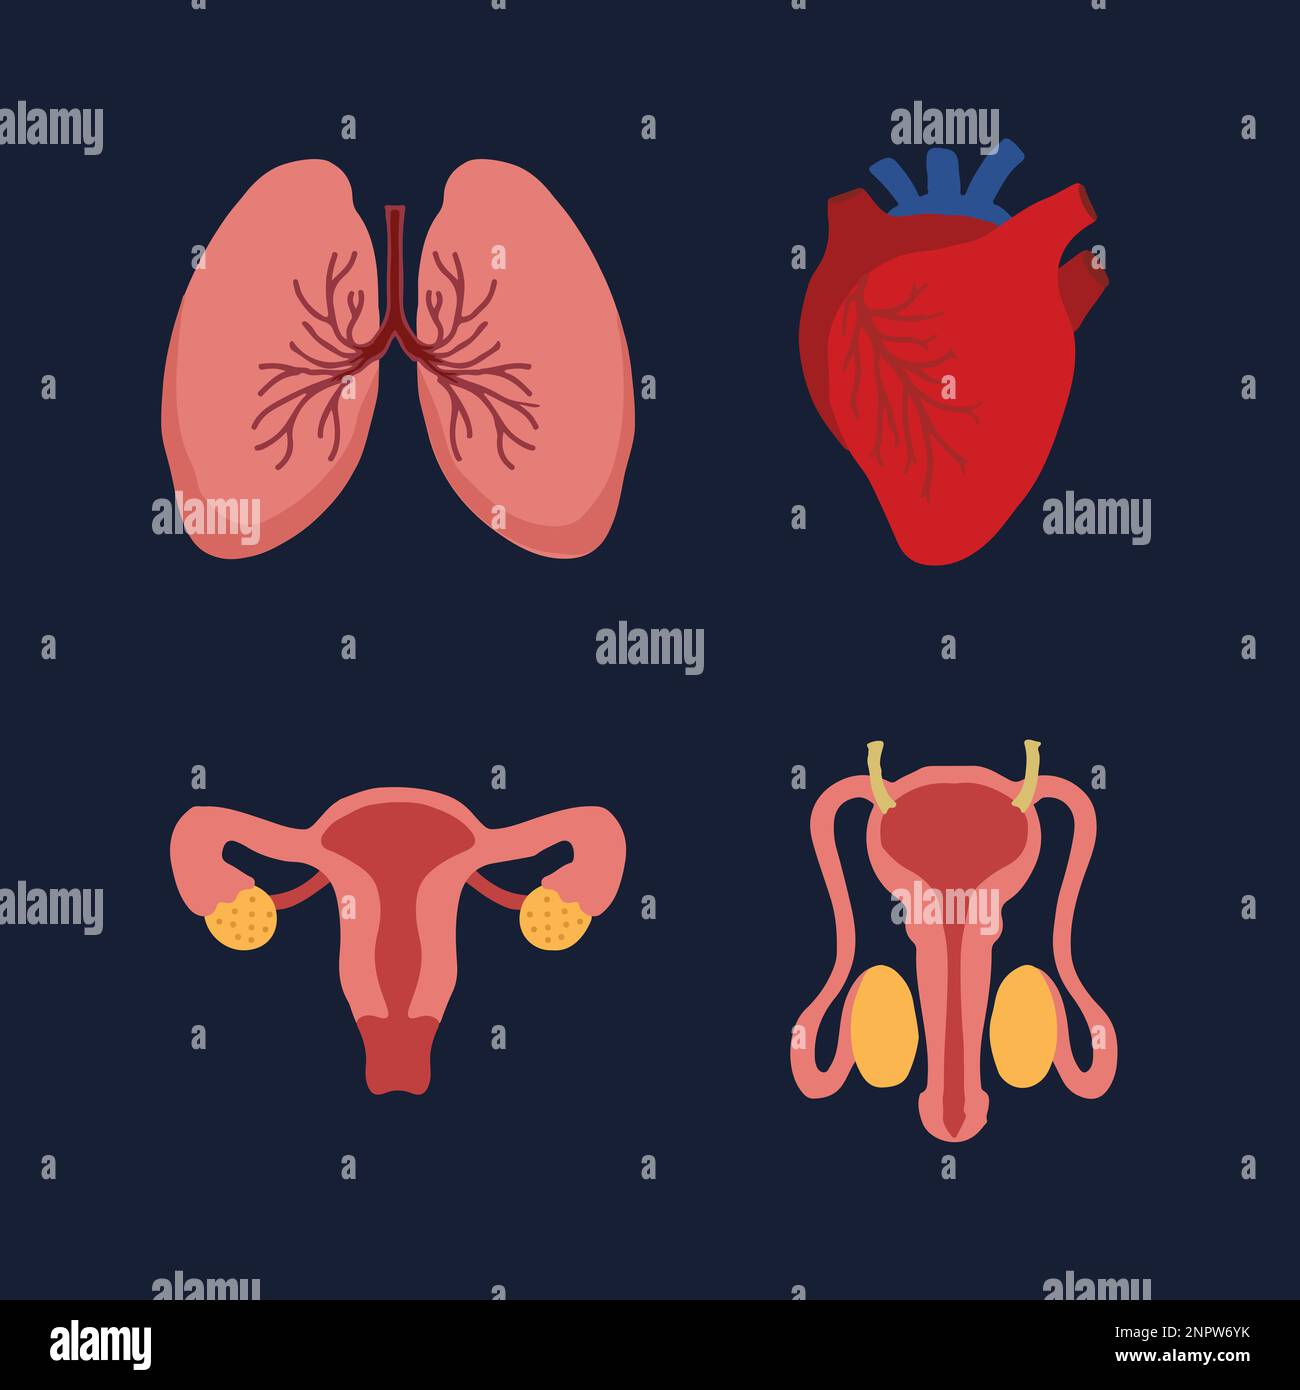 Human Internal Organs Cartoon Anatomy Body Parts Heart And Lungs Male And Female Reproductive